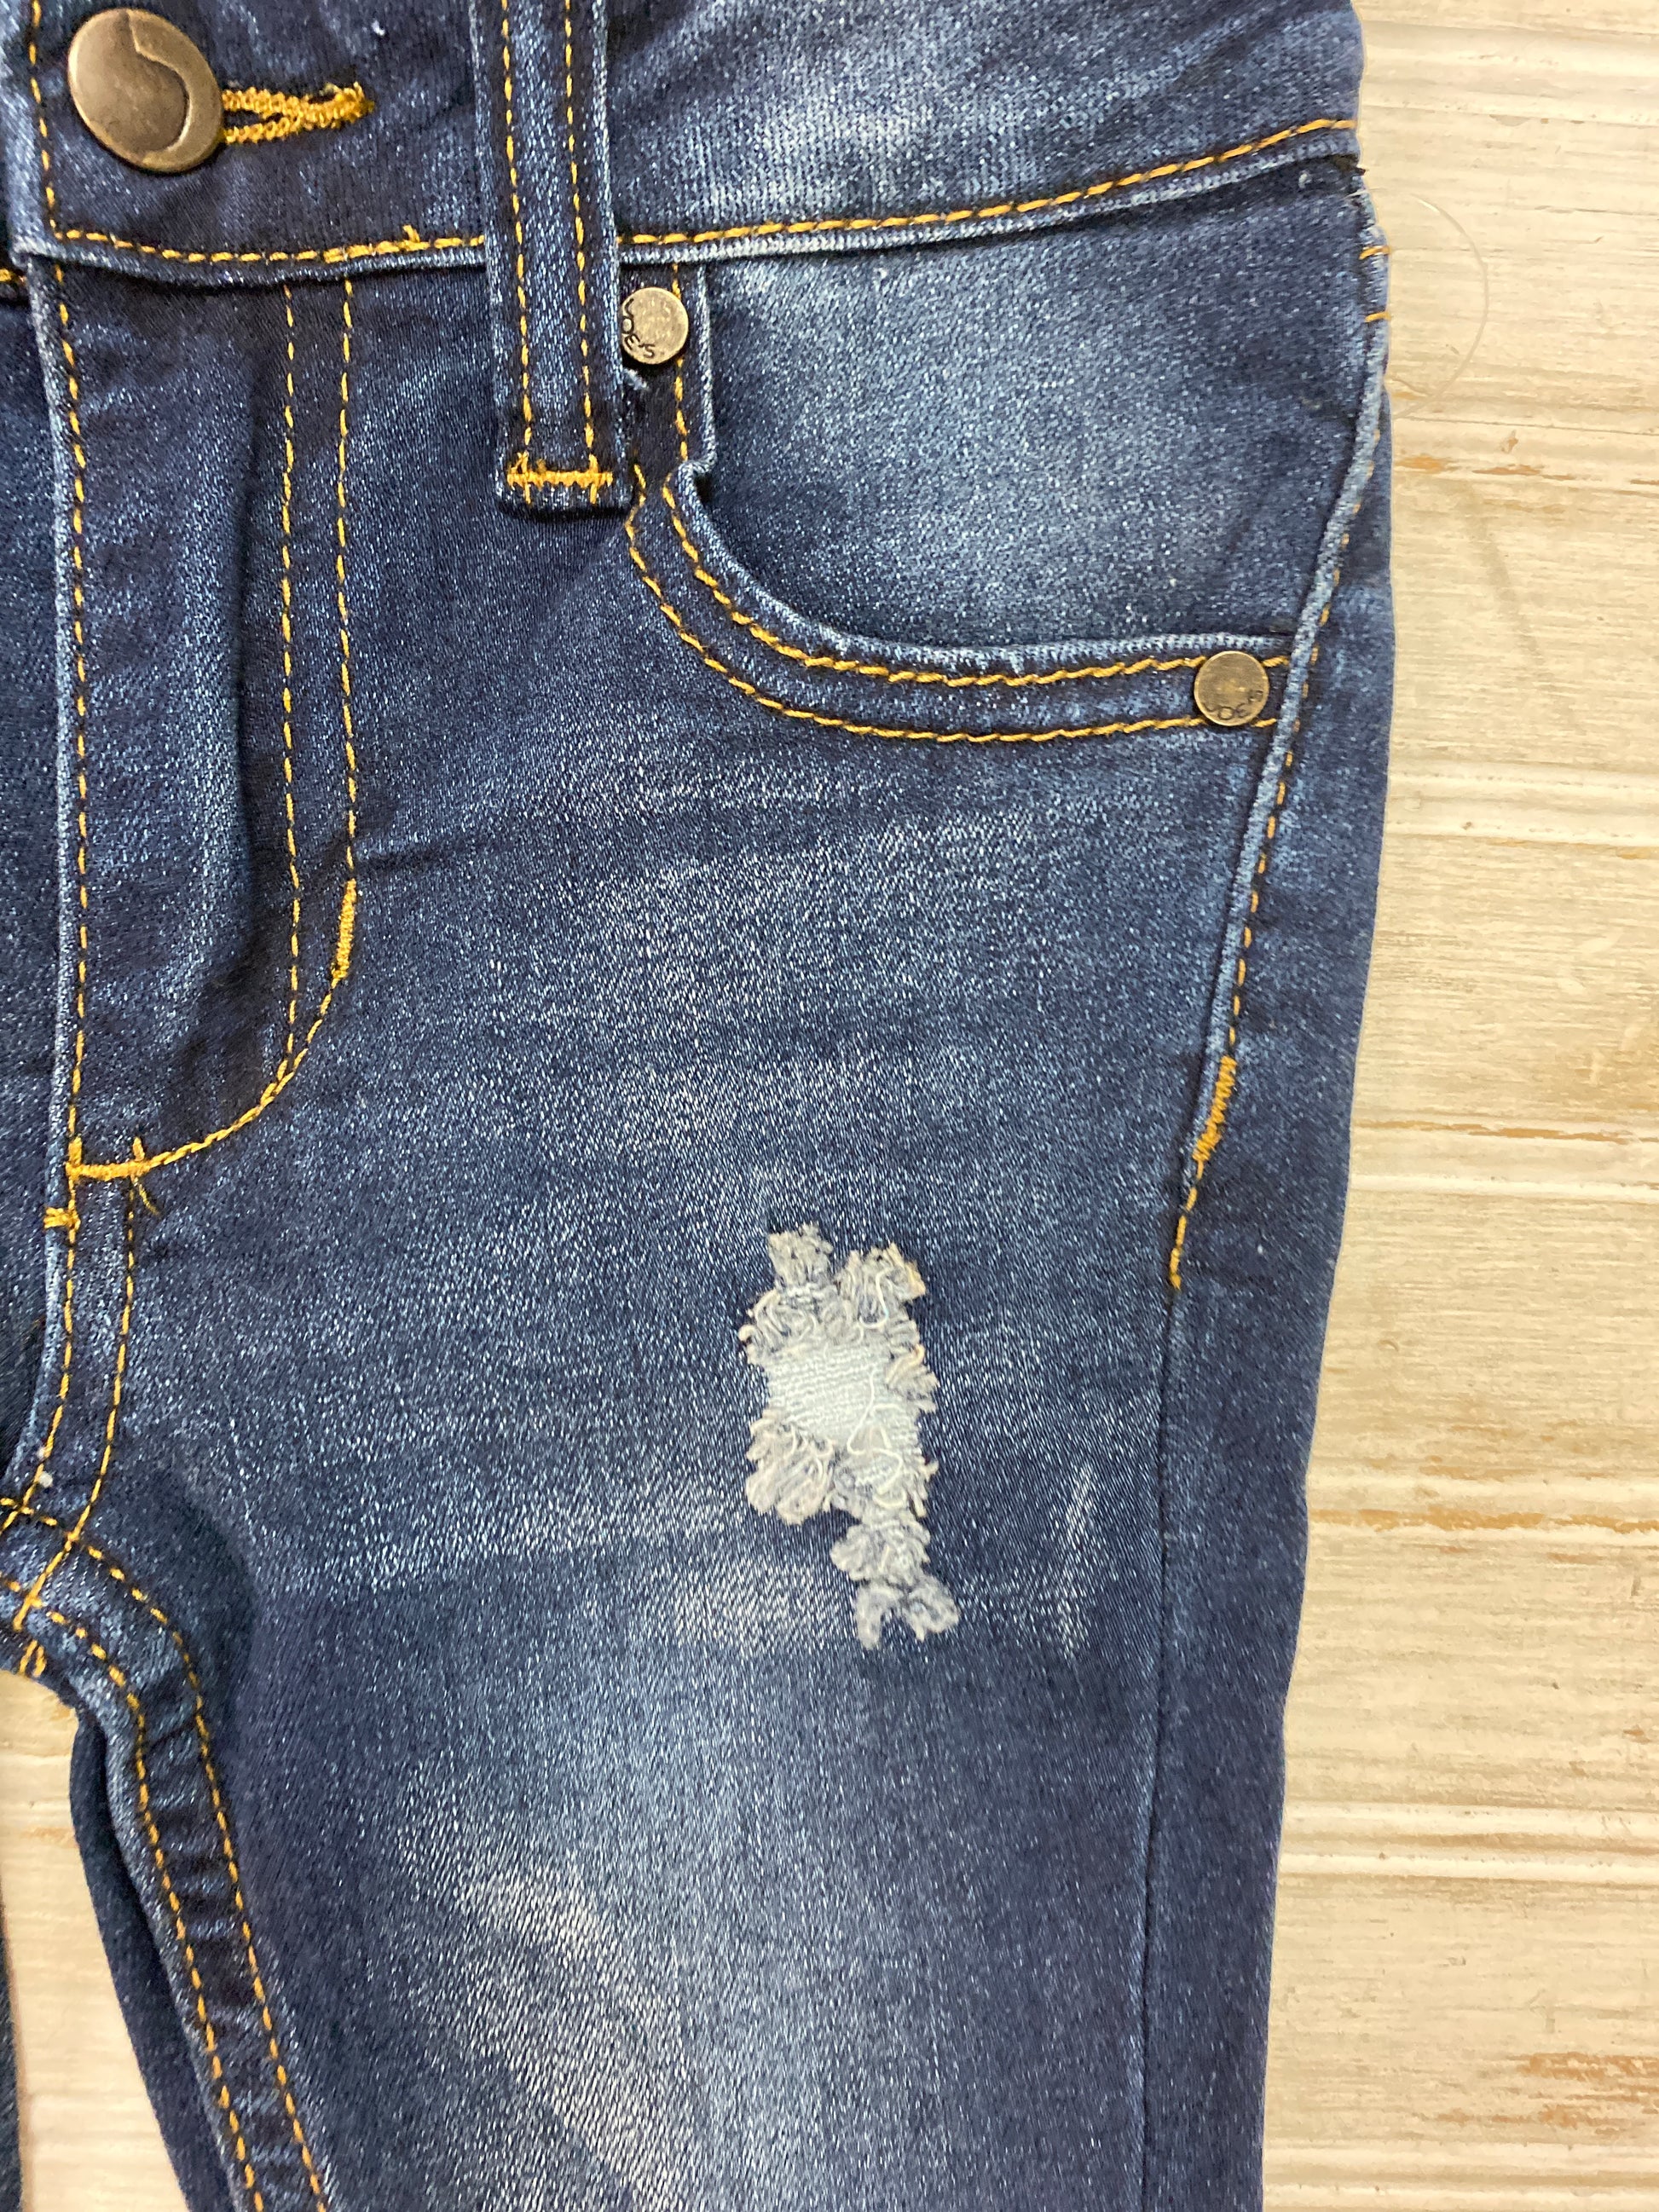 The Rad Jeans in Blue Pacific  - Doodlebug's Children's Boutique